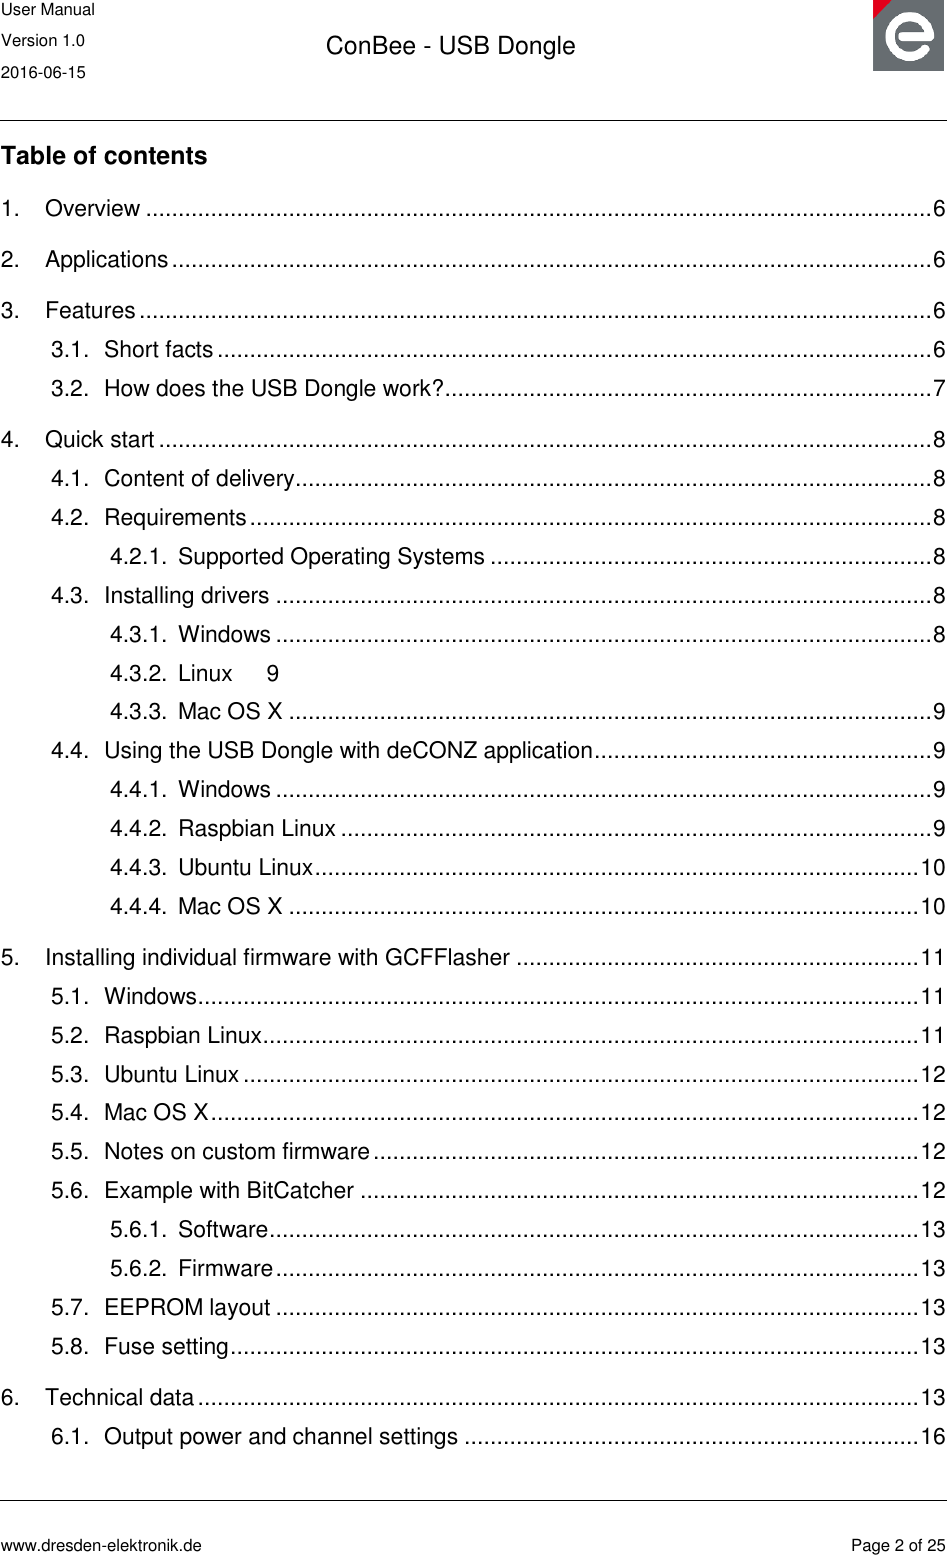 User Manual Version 1.0 2016-06-15  ConBee - USB Dongle      www.dresden-elektronik.de  Page 2 of 25  Table of contents 1. Overview ......................................................................................................................... 6 2. Applications ..................................................................................................................... 6 3. Features .......................................................................................................................... 6 3.1. Short facts .............................................................................................................. 6 3.2. How does the USB Dongle work? ........................................................................... 7 4. Quick start ....................................................................................................................... 8 4.1. Content of delivery.................................................................................................. 8 4.2. Requirements ......................................................................................................... 8 4.2.1. Supported Operating Systems .................................................................... 8 4.3. Installing drivers ..................................................................................................... 8 4.3.1. Windows ..................................................................................................... 8 4.3.2. Linux  9 4.3.3. Mac OS X ................................................................................................... 9 4.4. Using the USB Dongle with deCONZ application .................................................... 9 4.4.1. Windows ..................................................................................................... 9 4.4.2. Raspbian Linux ........................................................................................... 9 4.4.3. Ubuntu Linux ............................................................................................. 10 4.4.4. Mac OS X ................................................................................................. 10 5. Installing individual firmware with GCFFlasher .............................................................. 11 5.1. Windows ............................................................................................................... 11 5.2. Raspbian Linux ..................................................................................................... 11 5.3. Ubuntu Linux ........................................................................................................ 12 5.4. Mac OS X ............................................................................................................. 12 5.5. Notes on custom firmware .................................................................................... 12 5.6. Example with BitCatcher ...................................................................................... 12 5.6.1. Software .................................................................................................... 13 5.6.2. Firmware ................................................................................................... 13 5.7. EEPROM layout ................................................................................................... 13 5.8. Fuse setting .......................................................................................................... 13 6. Technical data ............................................................................................................... 13 6.1. Output power and channel settings ...................................................................... 16 